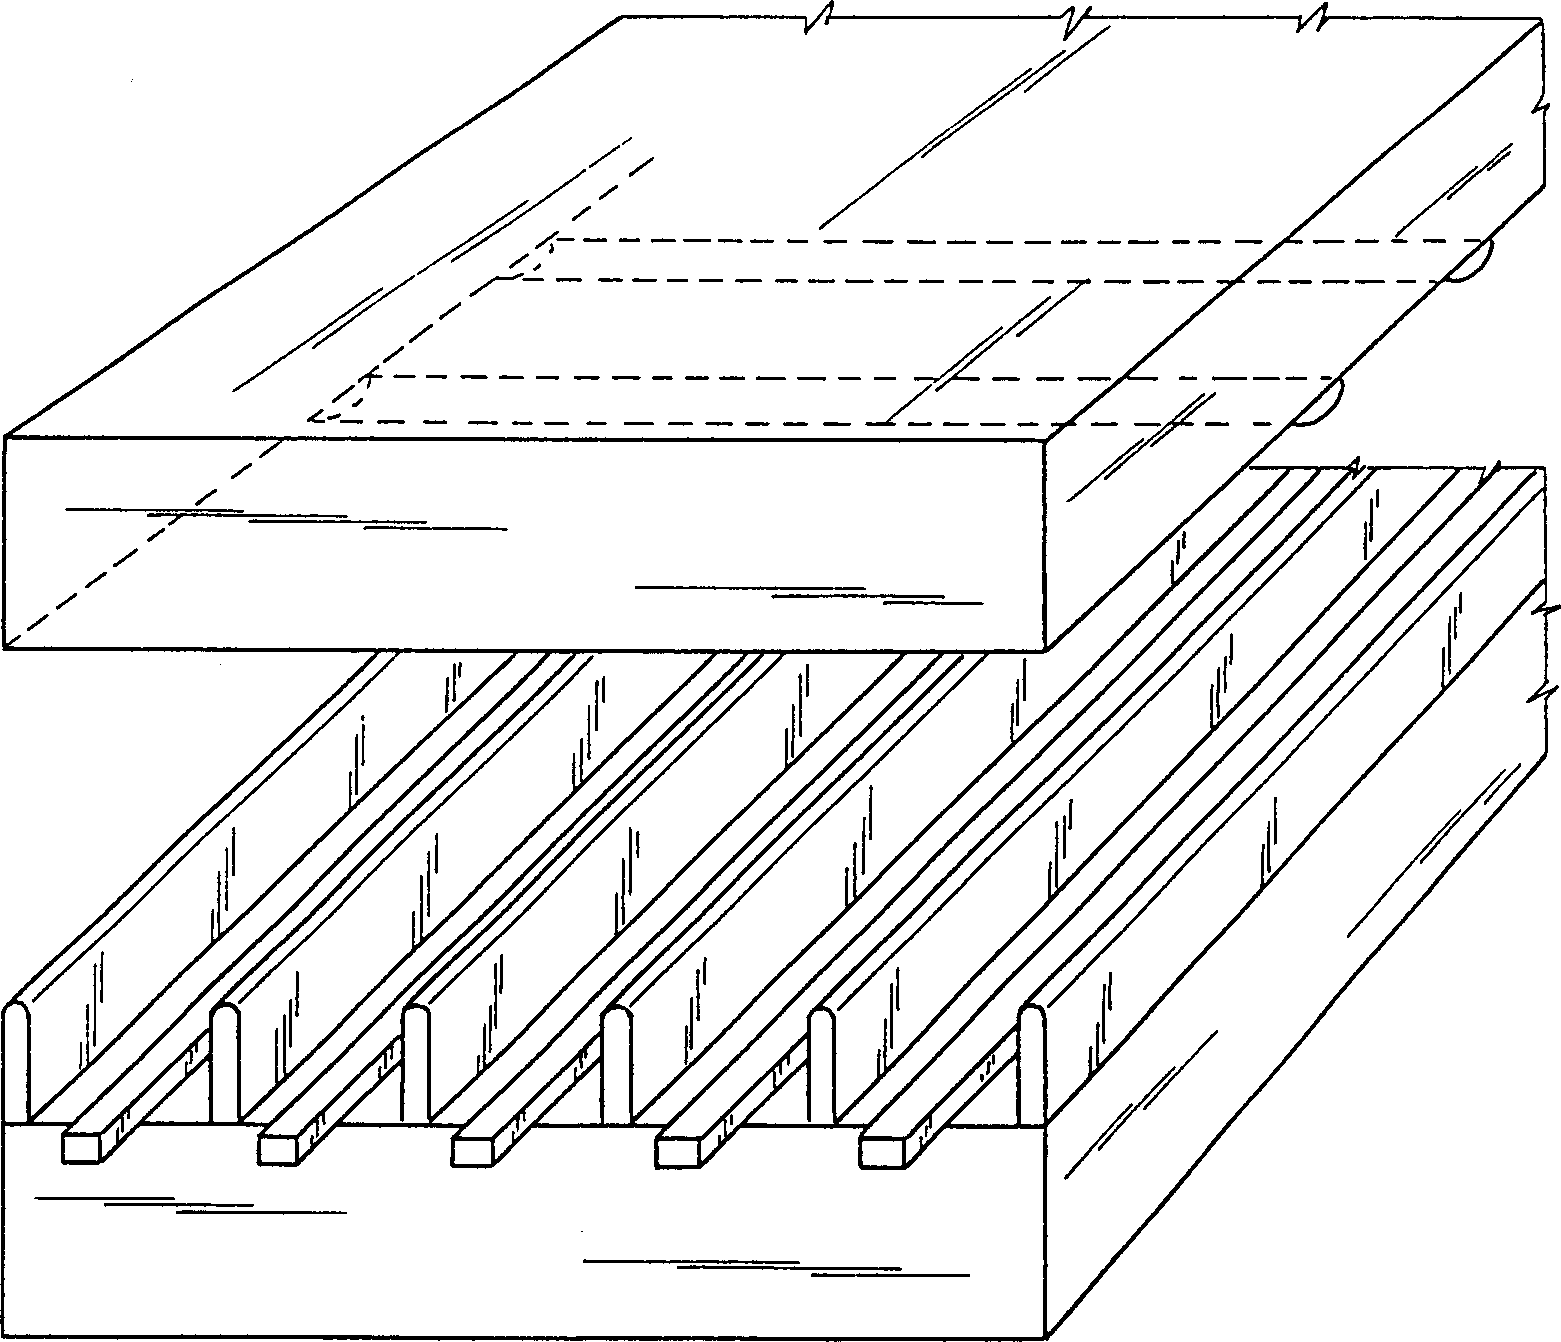 Getter system in plasma plane-plate used as screen